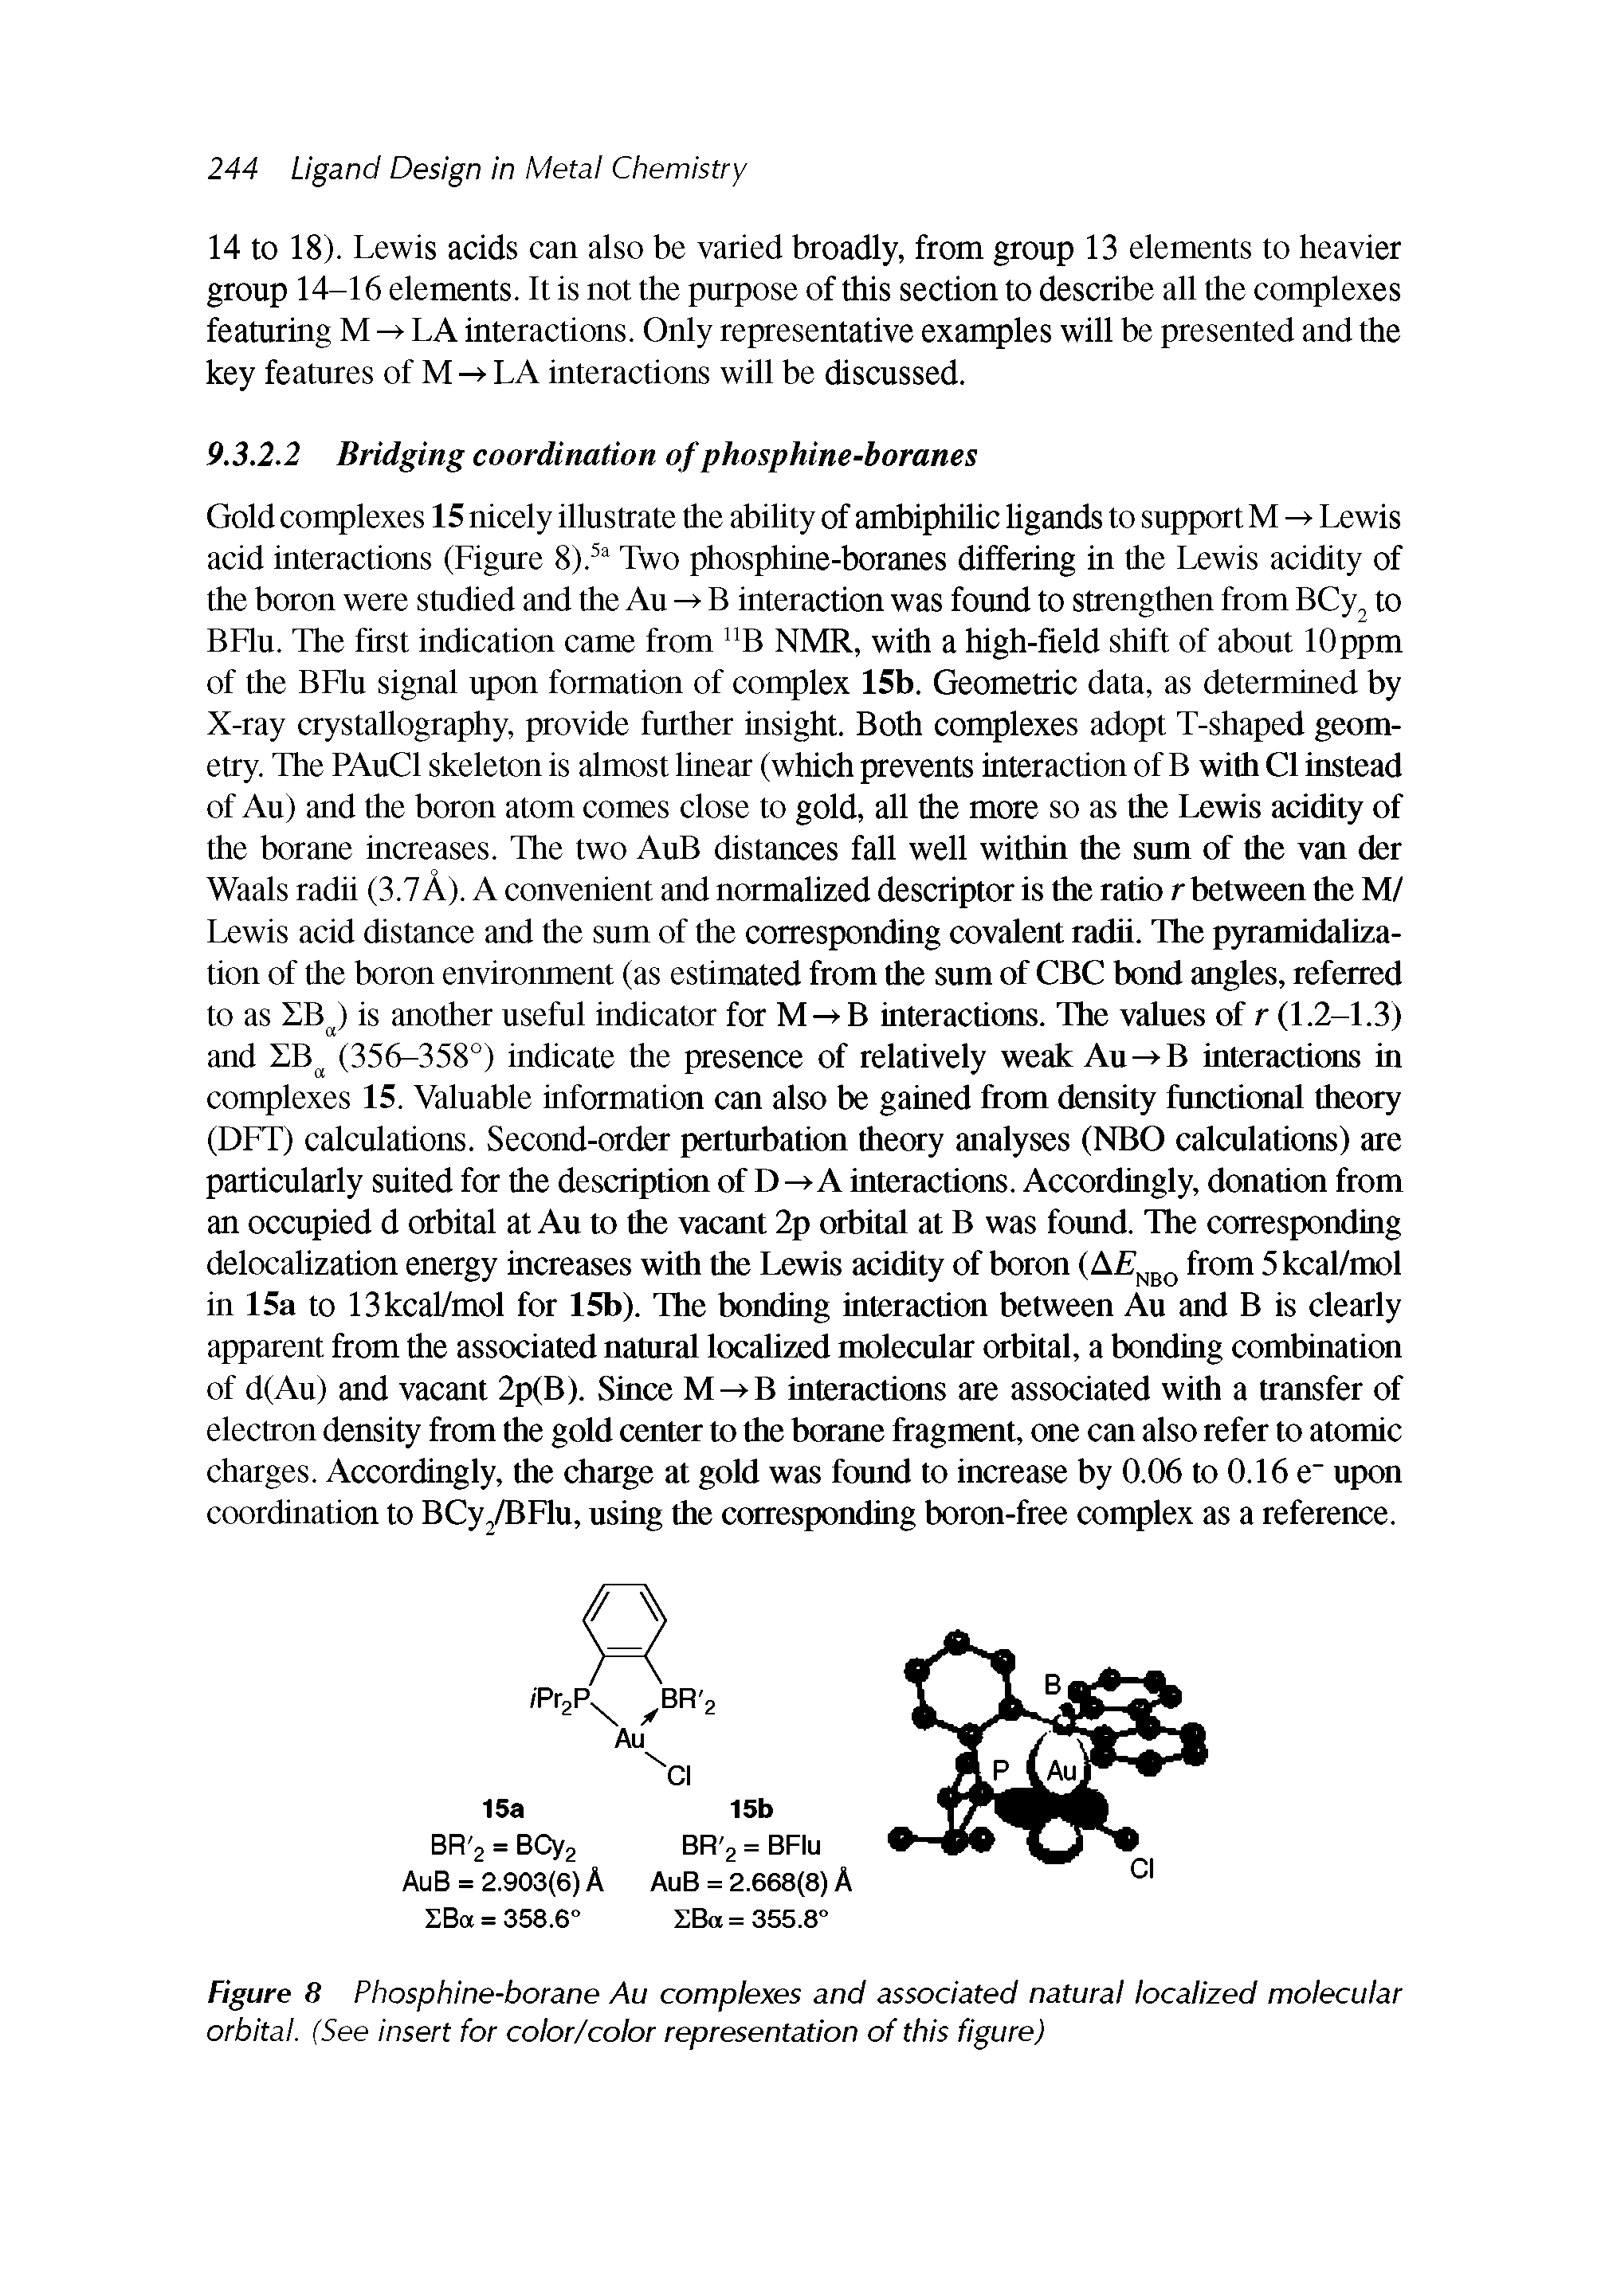 Figure 8 Phosphine-borane Au complexes and associated natural localized molecular orbital. (See insert for color/color representation of this figure)...